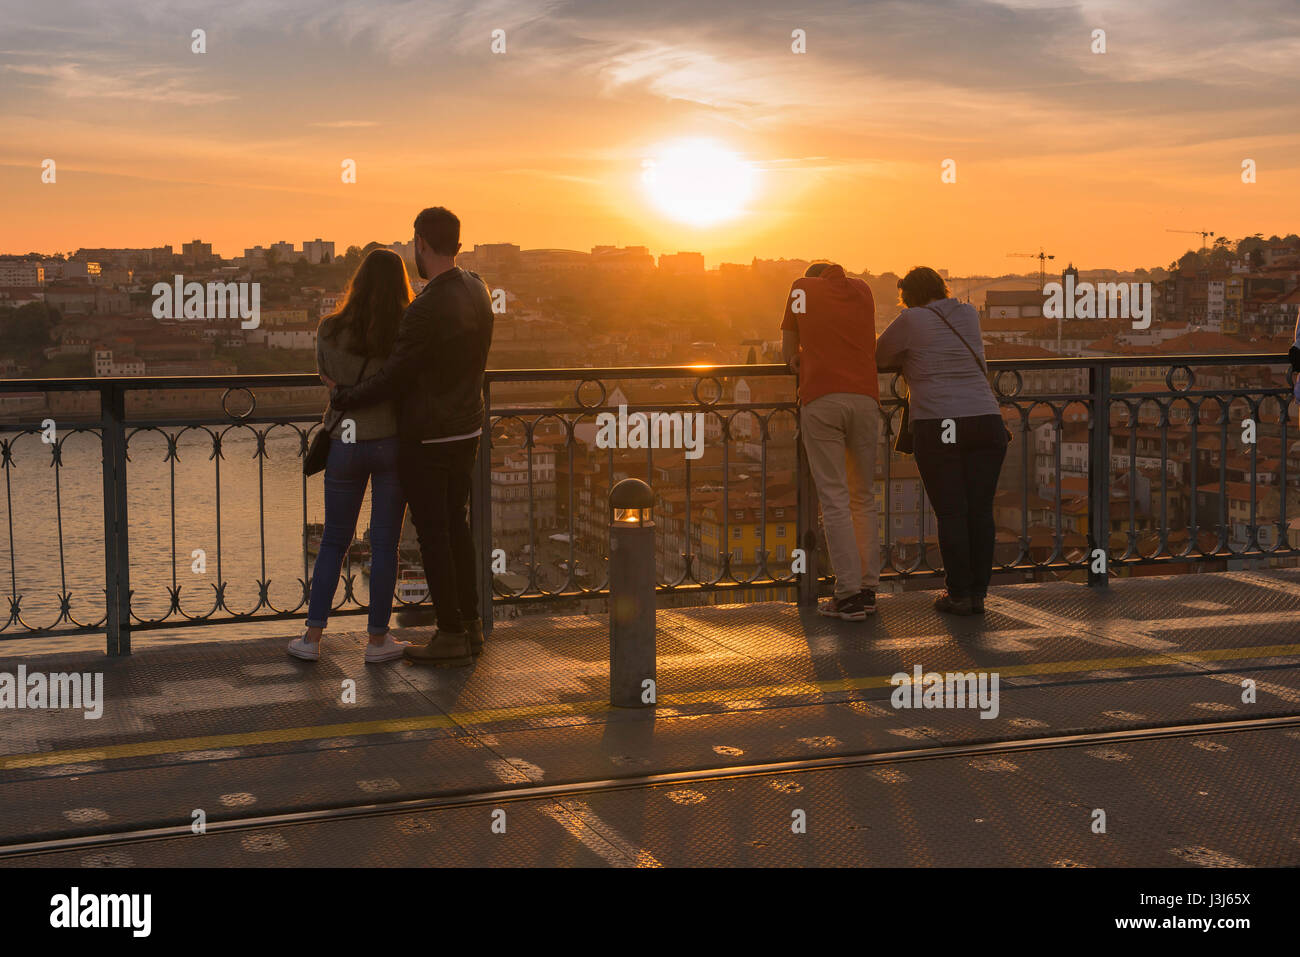 Tourists Porto Portugal, view of couples standing on the Ponte Dom Luis I bridge and watching a sunset over the city of Porto, Portugal, Europe Stock Photo